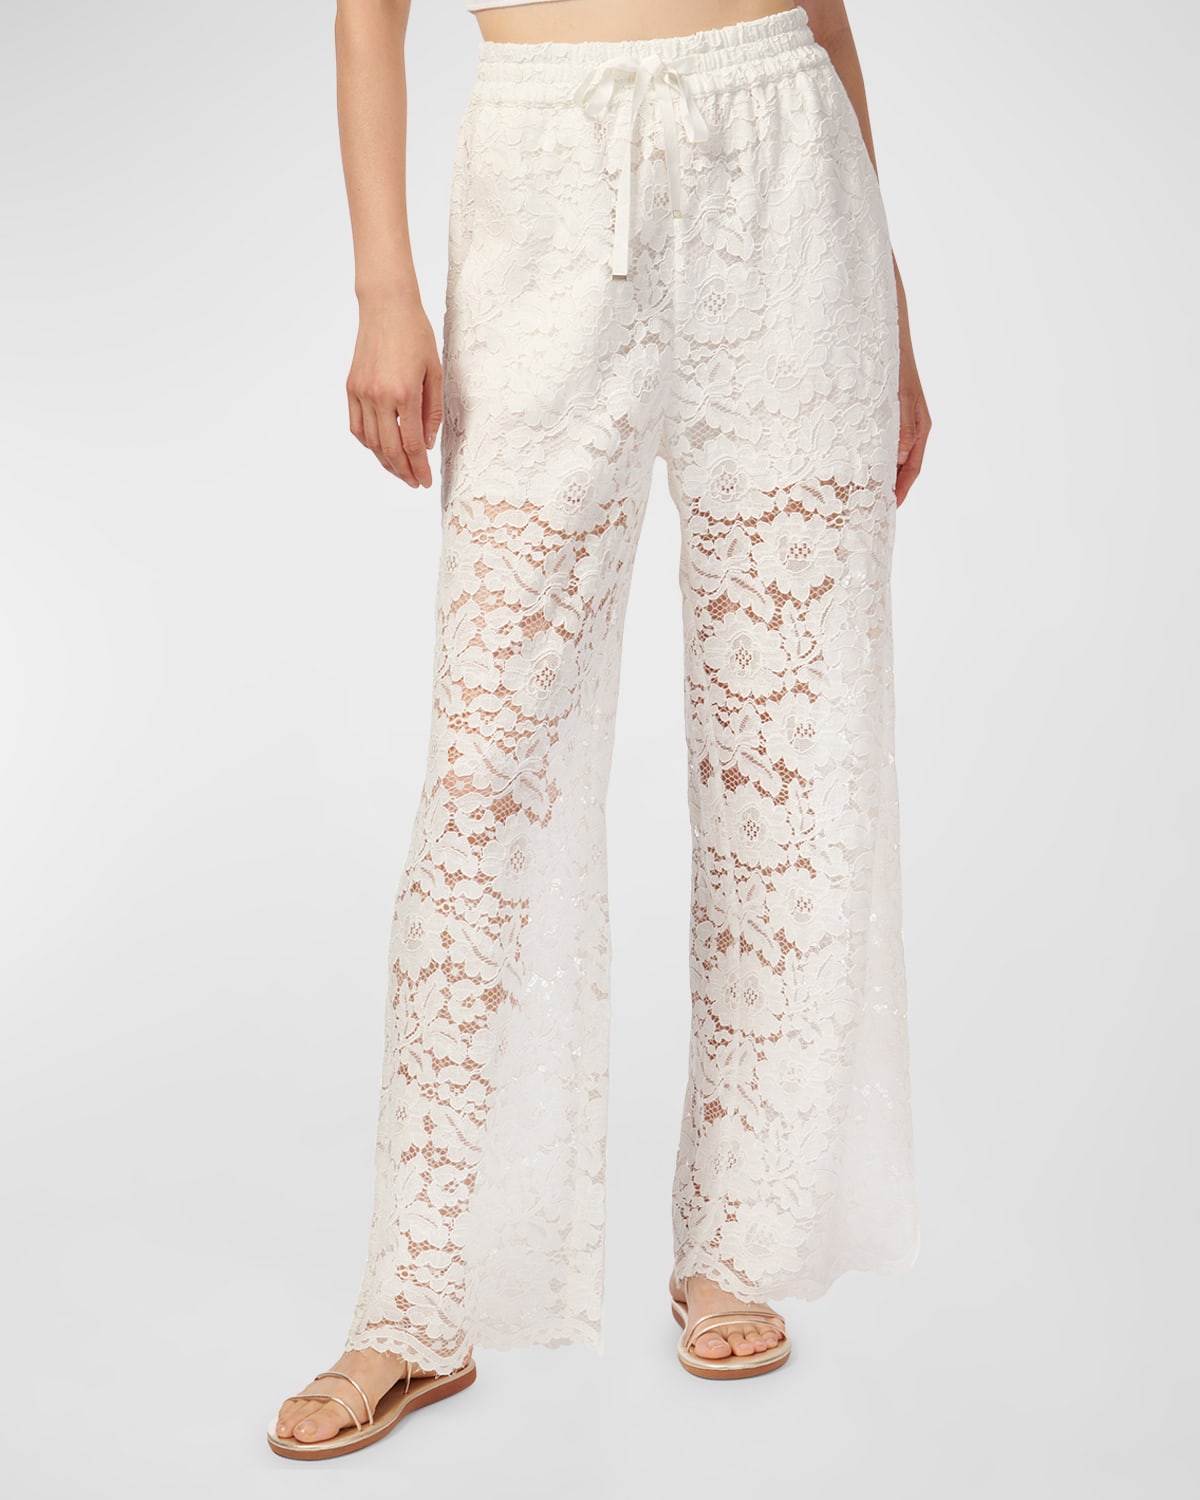 Cami Nyc Dara Floral Crochet Lace Wide-leg Pants In White